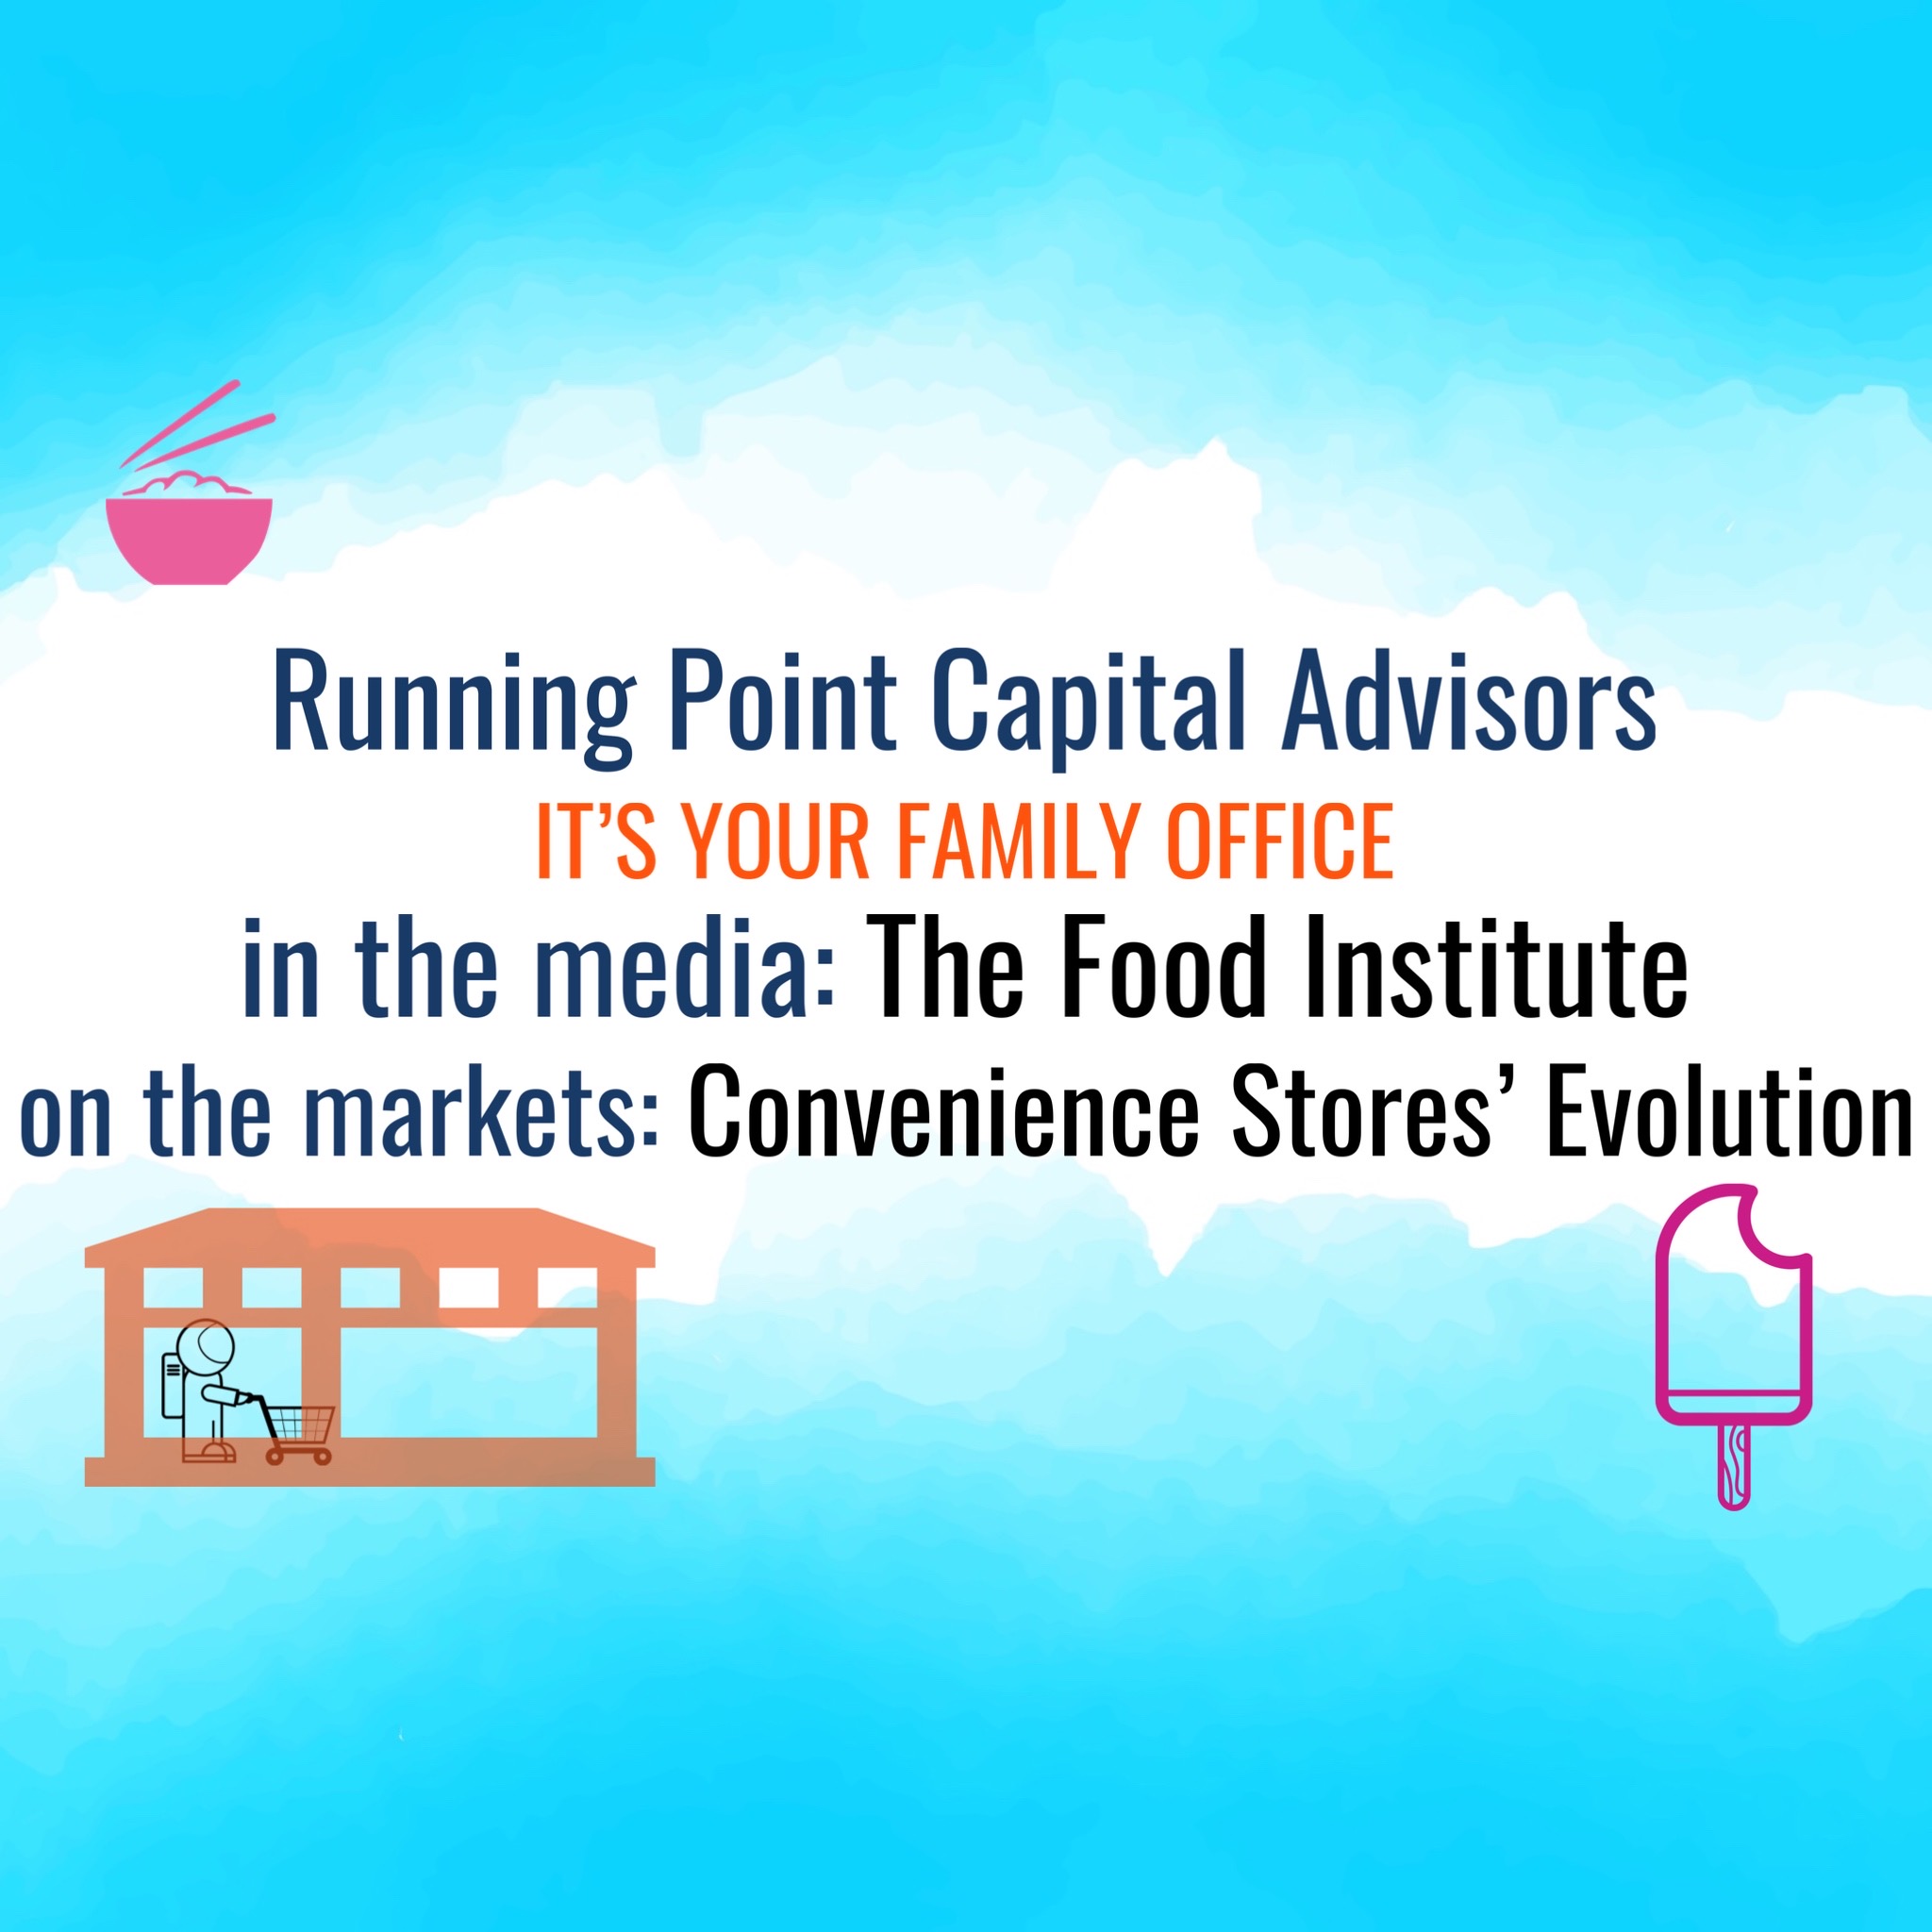 The Food Institute: Convenience Stores’ Evolution